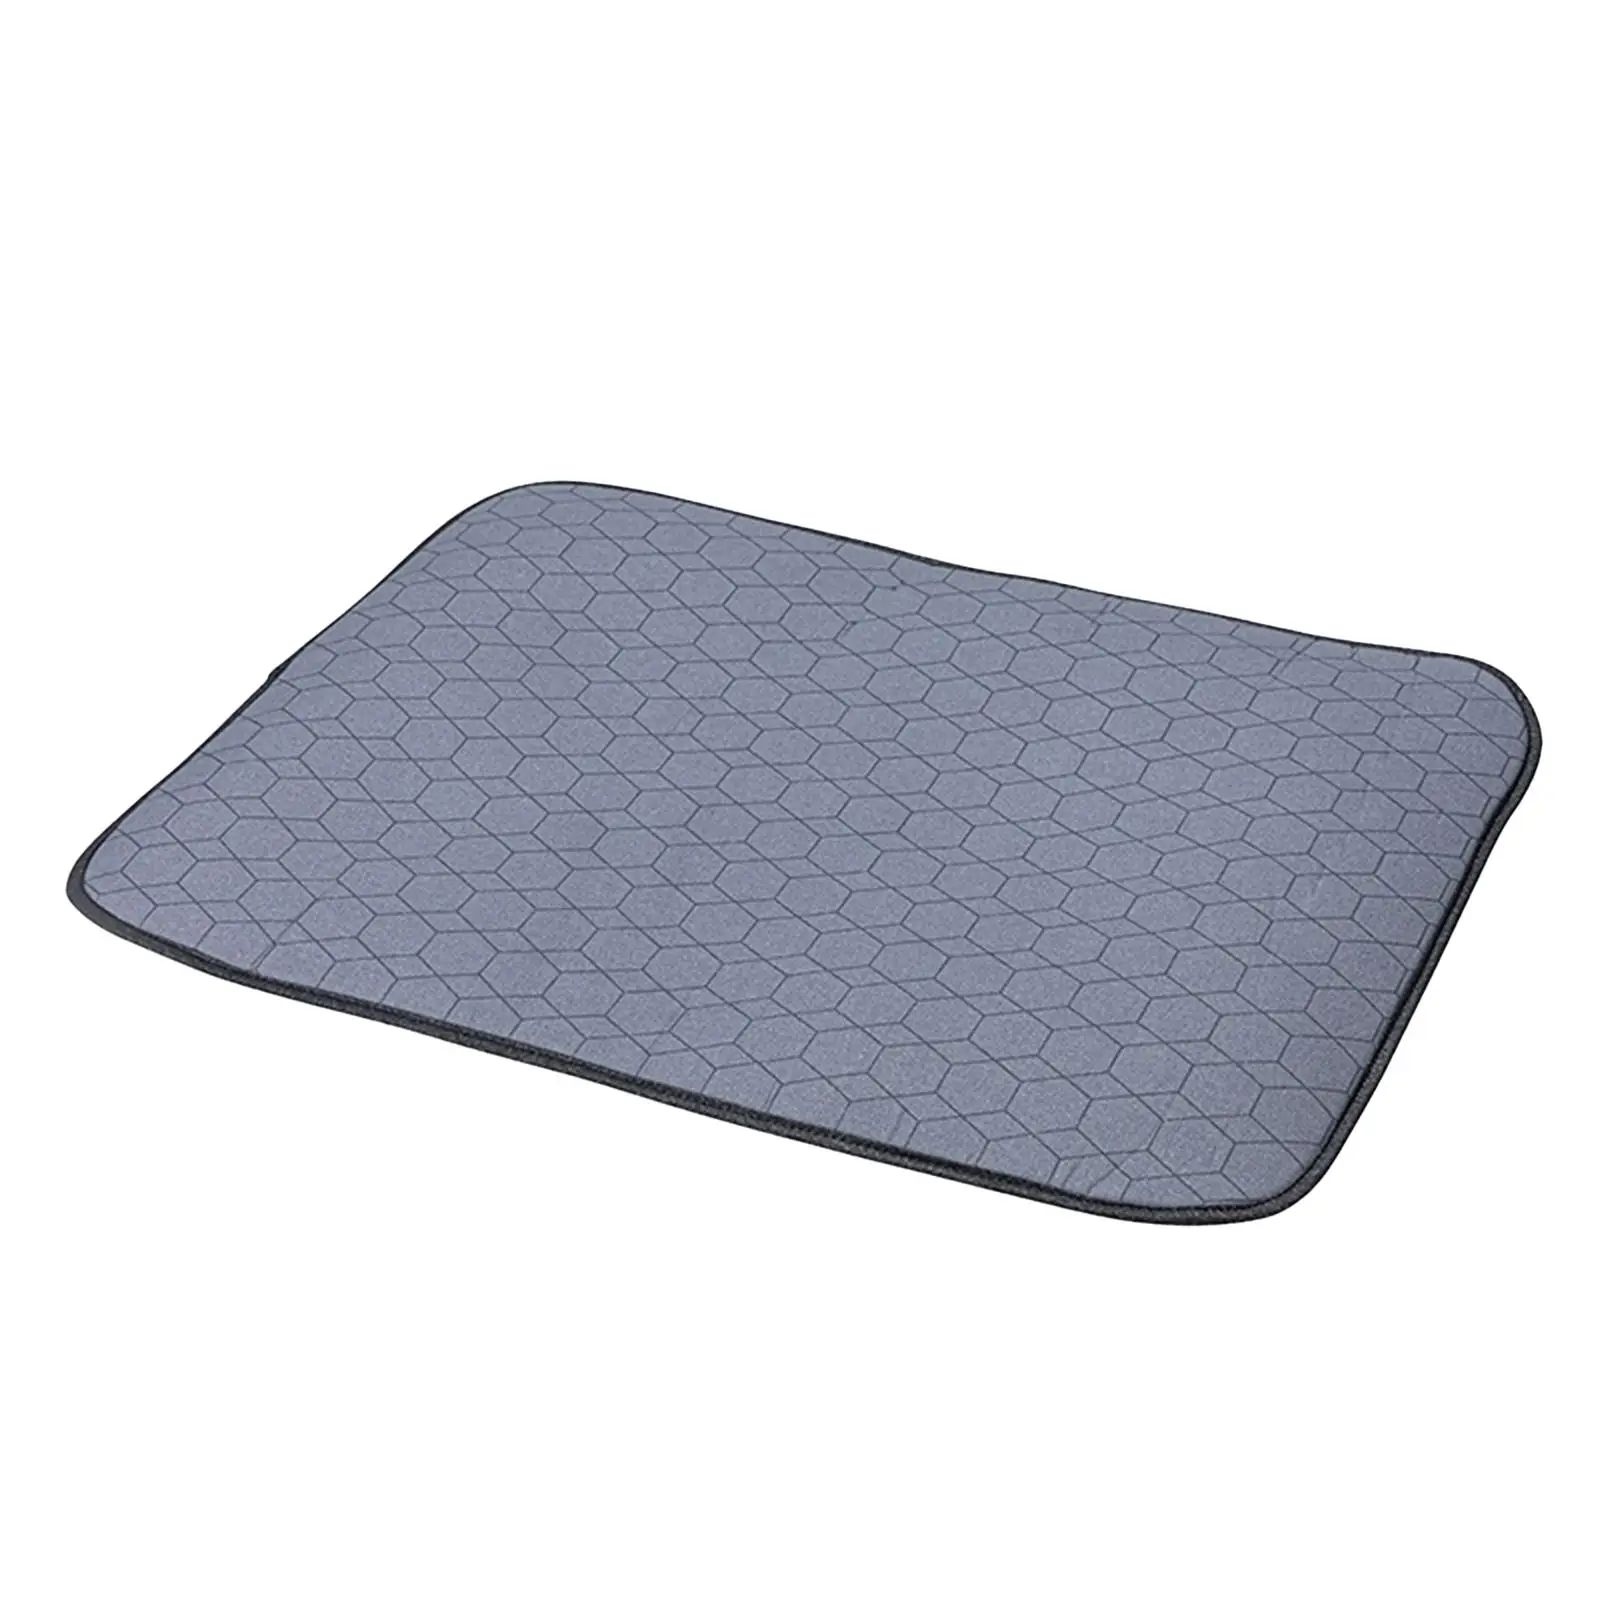 Ironing Mat Foldable Washable Ironing Board Foldable Iron Board Auxiliary Tool for Apartment Laundry Room Dorm Household Sleeves